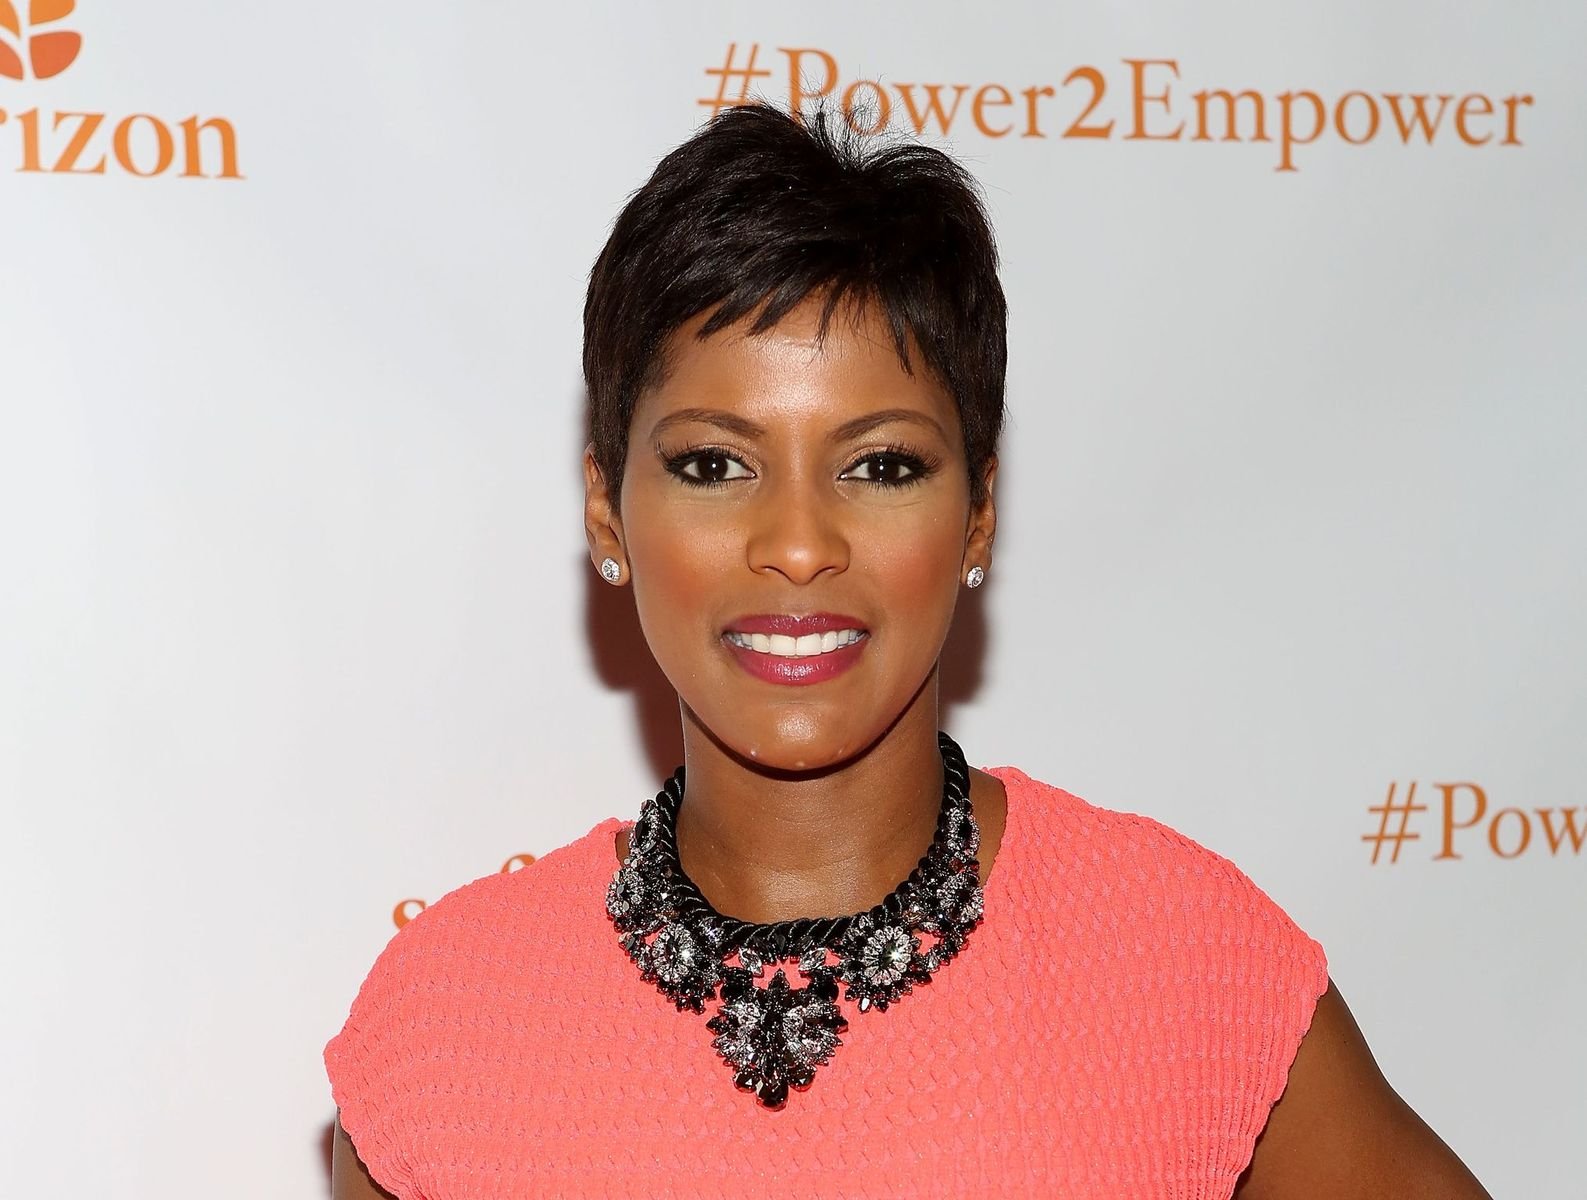 TV show host Tamron Hall attends the 2014 Champion Awards organized by Safe Horizons group at Chelsea Piers in New York City. | Photo: Getty Images